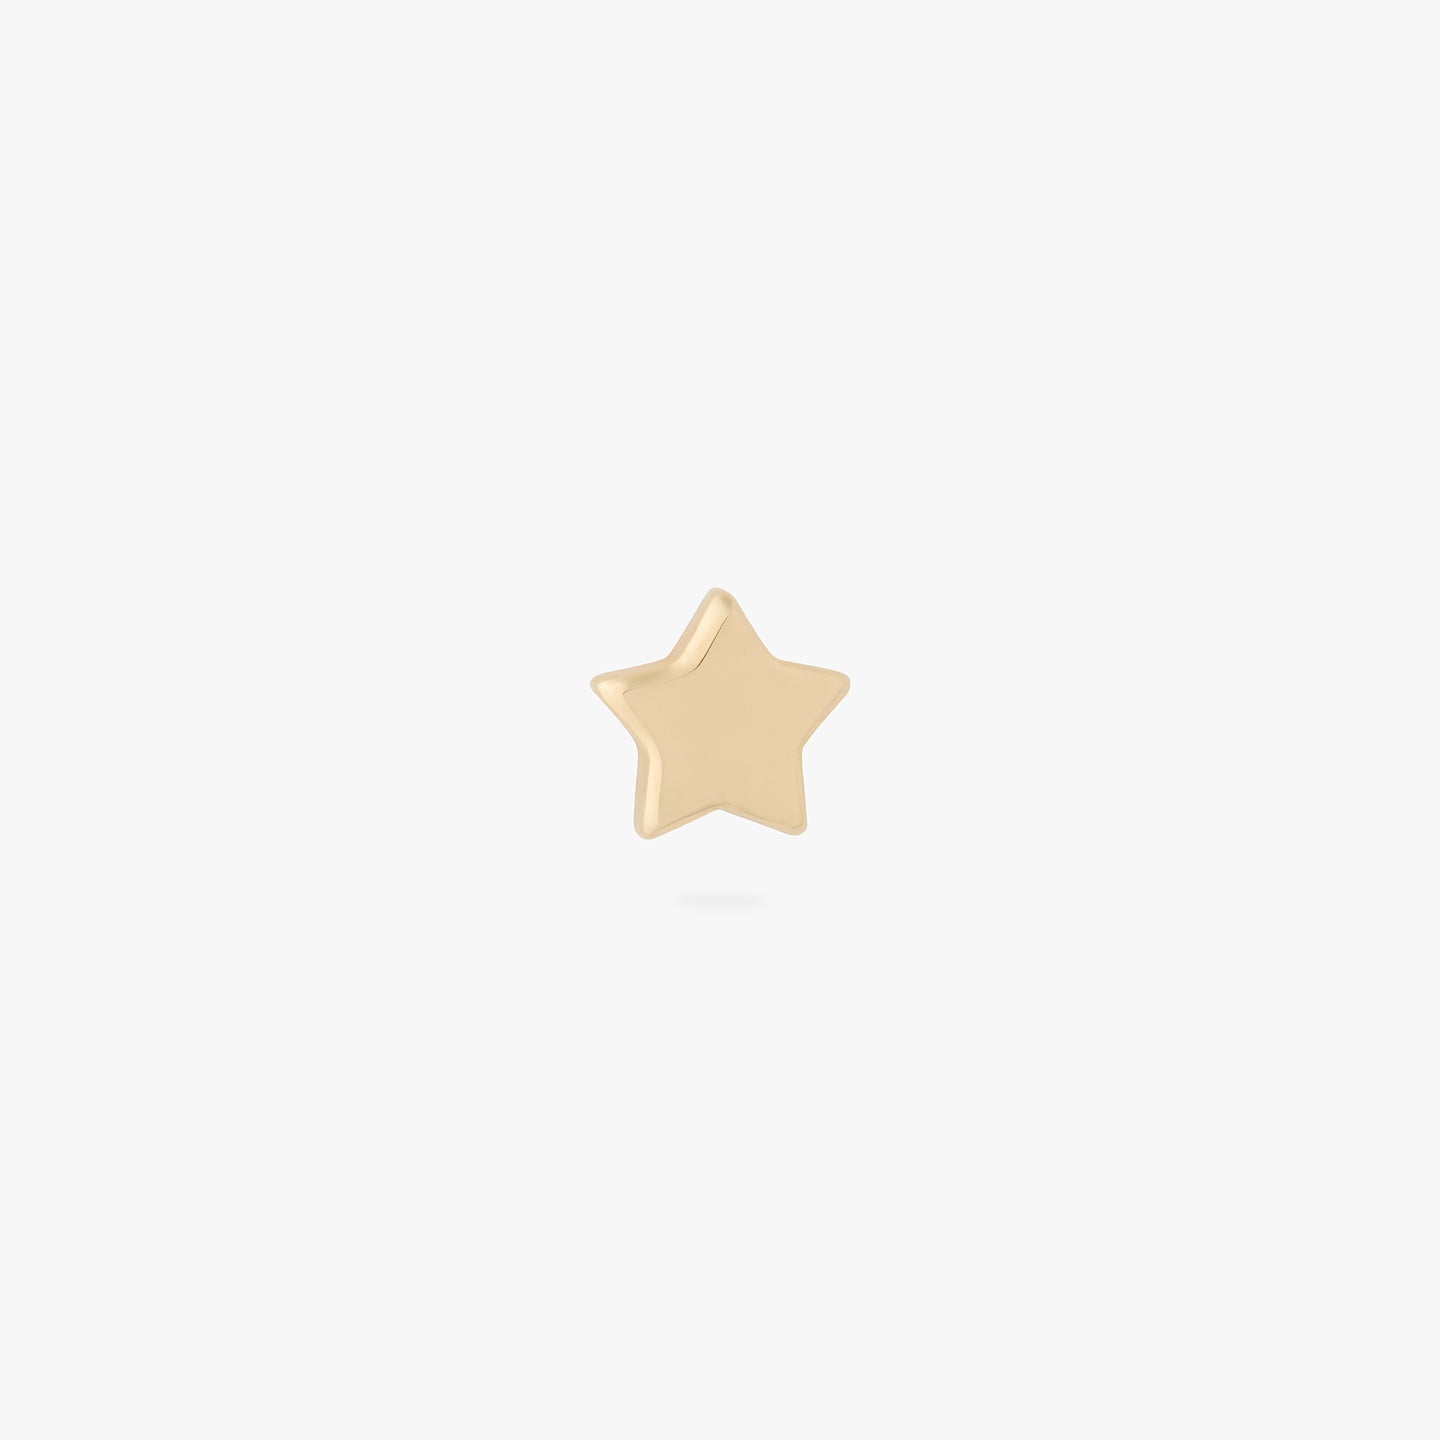 An image of a gold star shaped flatback post that is 6mm in length. color:null|6mm length